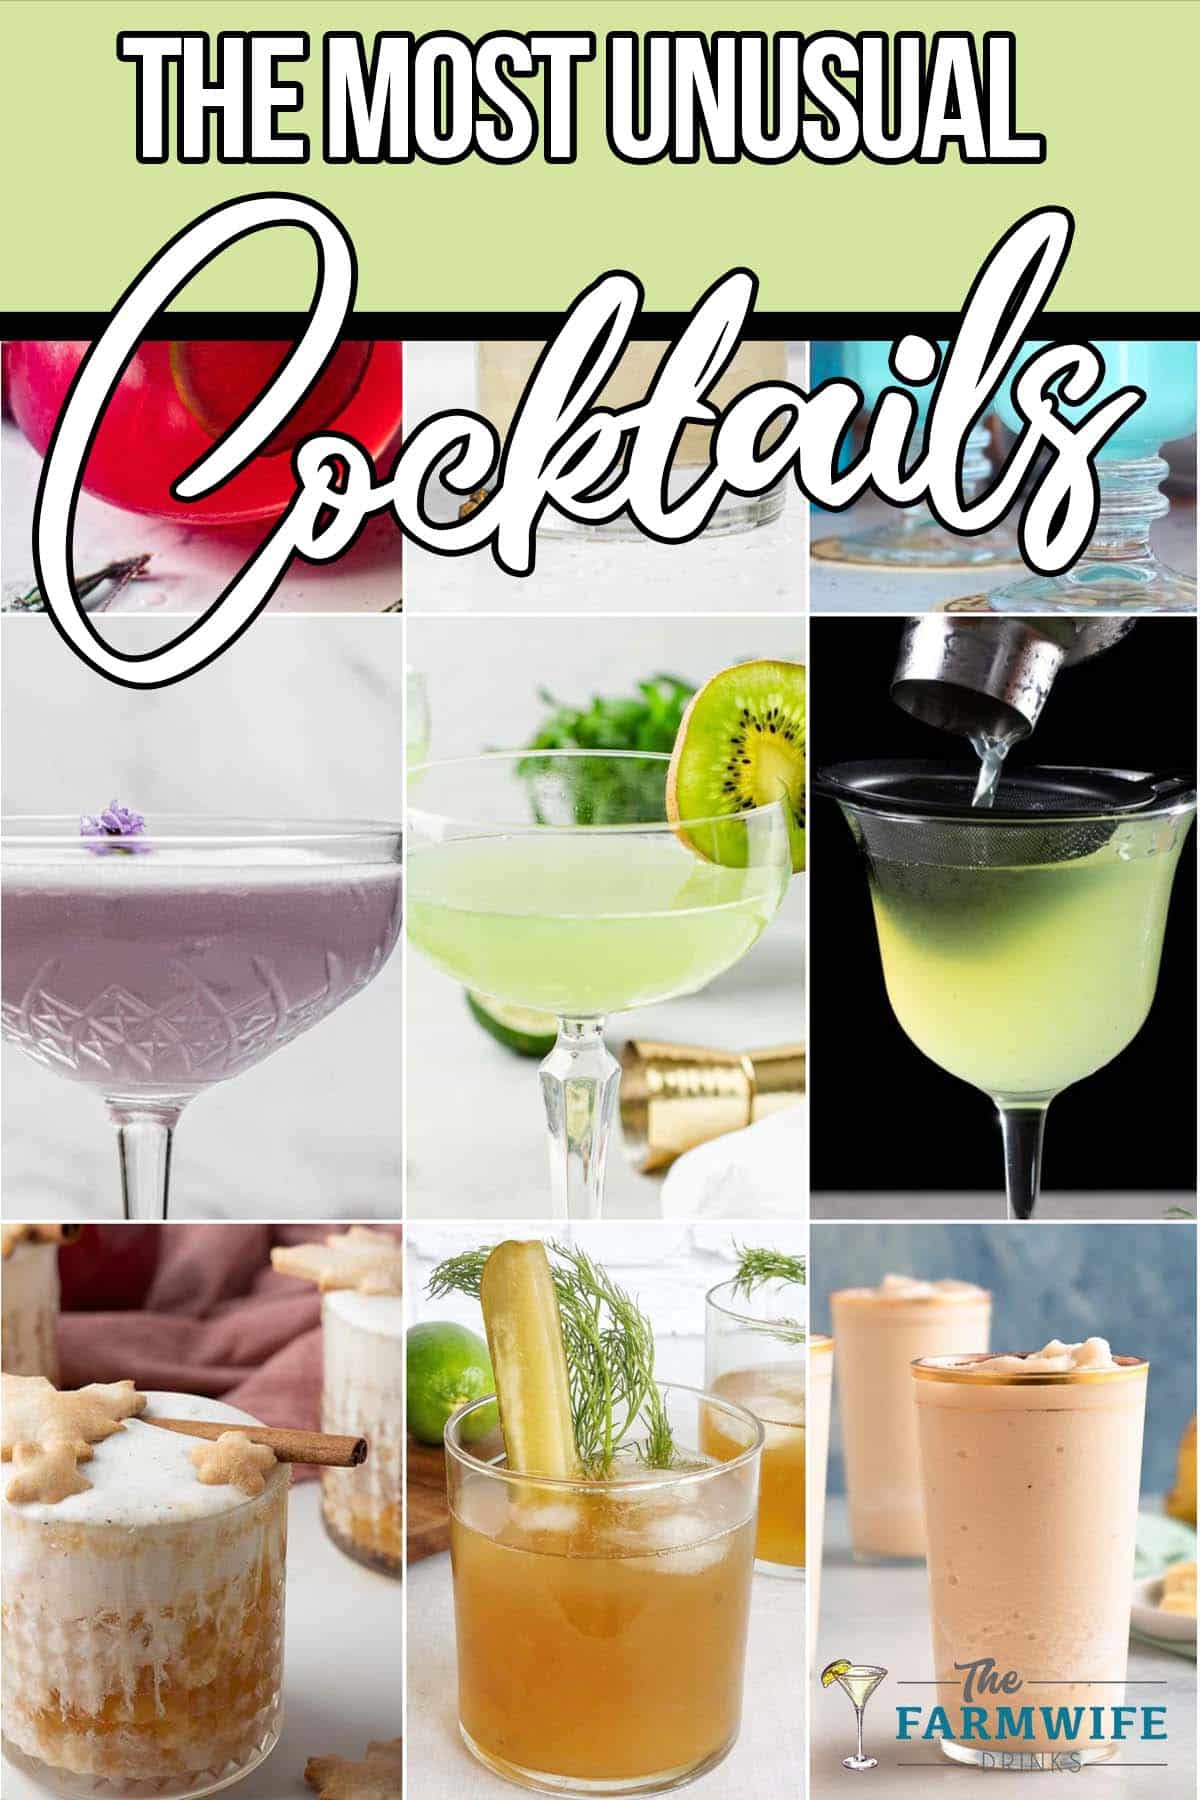 photo collage of the most unusual mixed beverages with text which reads the most unusual cocktails